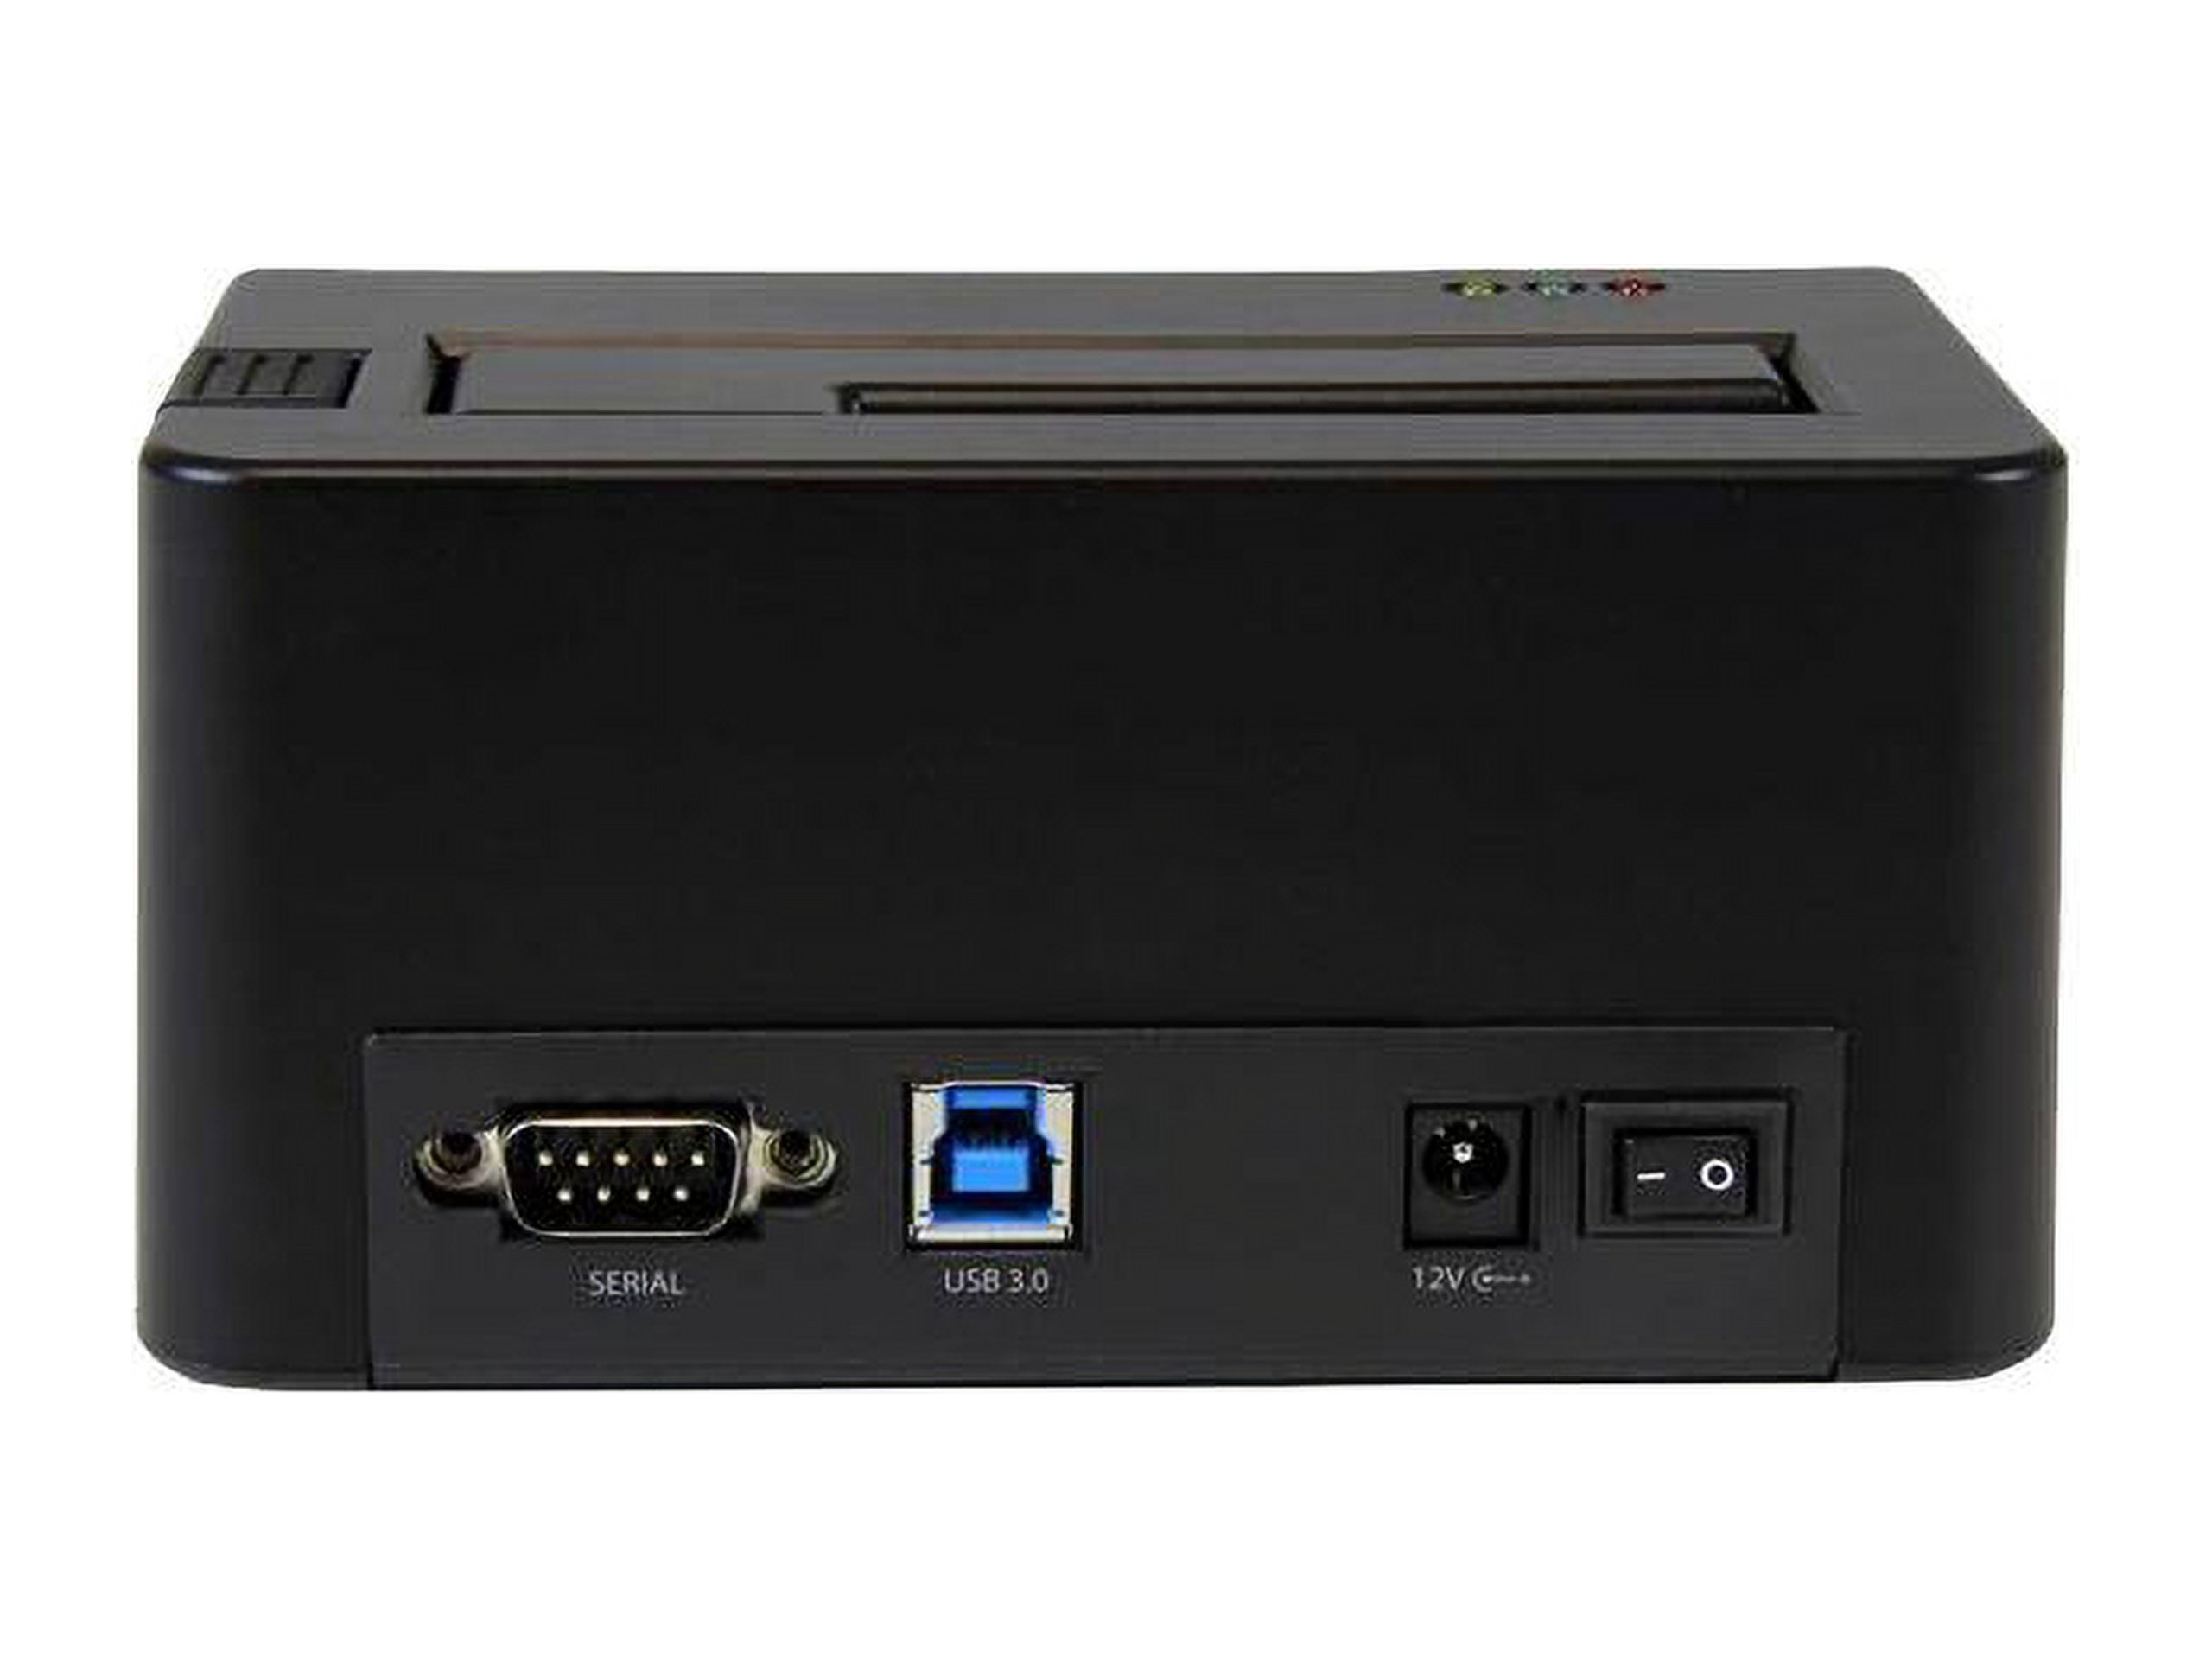 StarTech.com SDOCK1EU3P USB 3.0 Standalone Eraser Dock for 2.5" and 3.5” SATA SSD/HDD Drives - Secure Drive Erase with Receipt Printing - SATA I/II - image 3 of 4